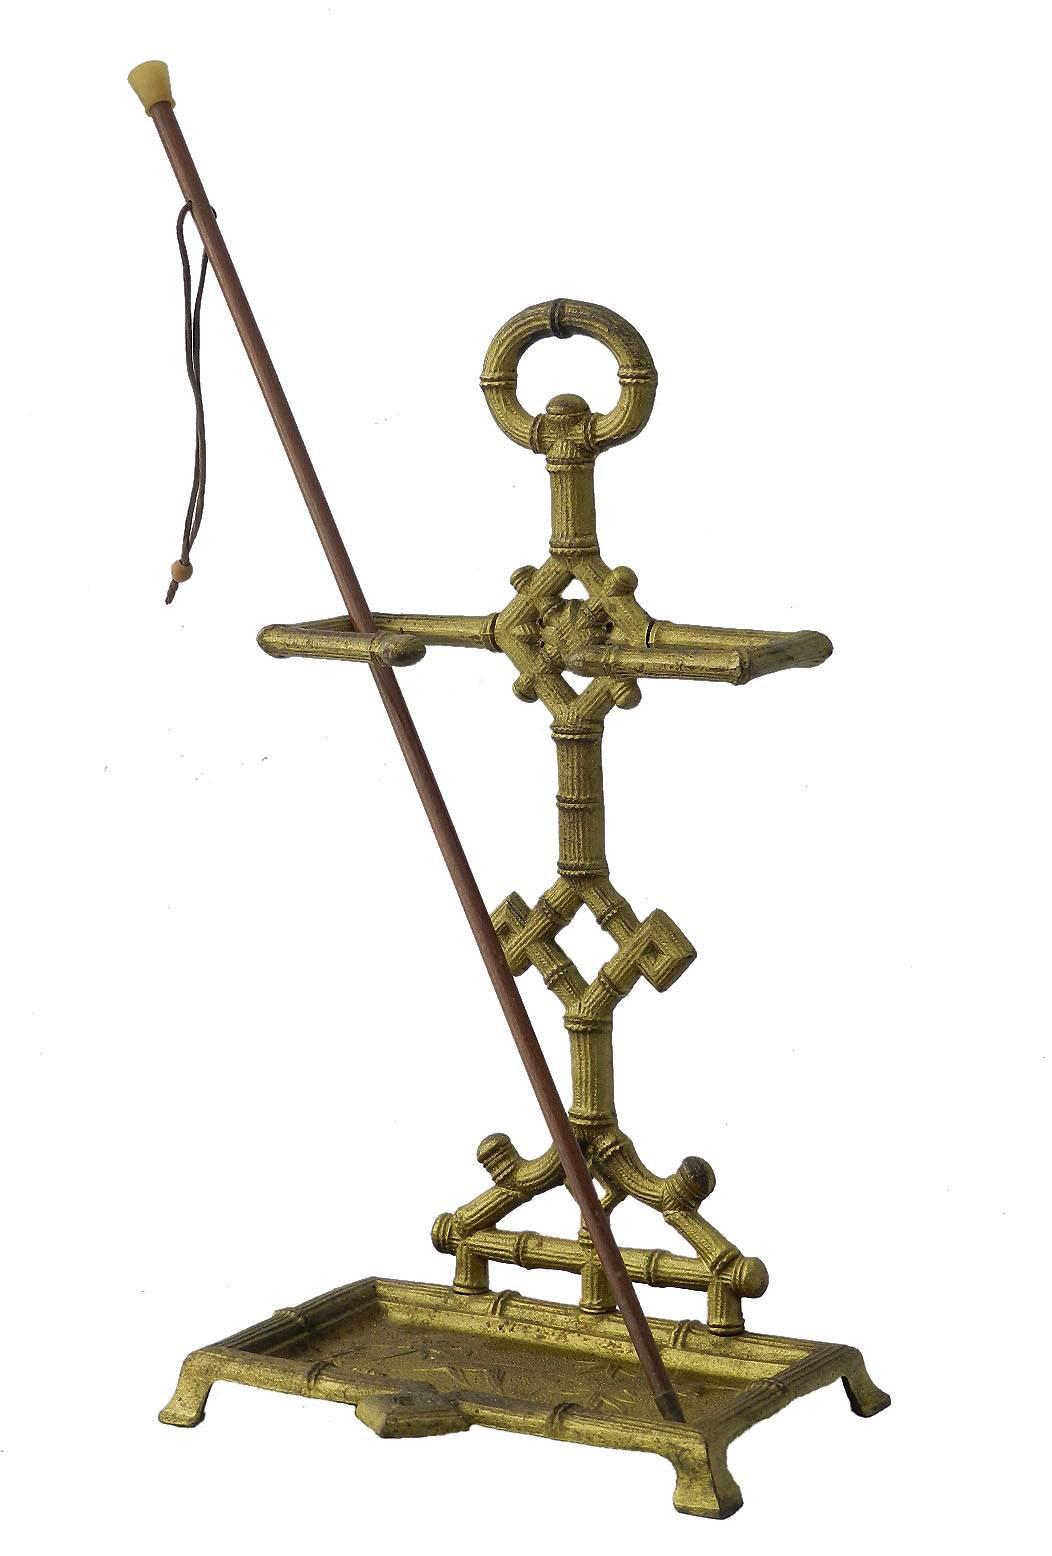 Diminutive Stick Stand Cast Iron Faux Bamboo Aesthetic revival Chinoiserie
Ideal for a stick collector
For floor or stand on table top display
Great for swagger sticks and batons as well as walking sticks
Embossed chinoiserie bird and